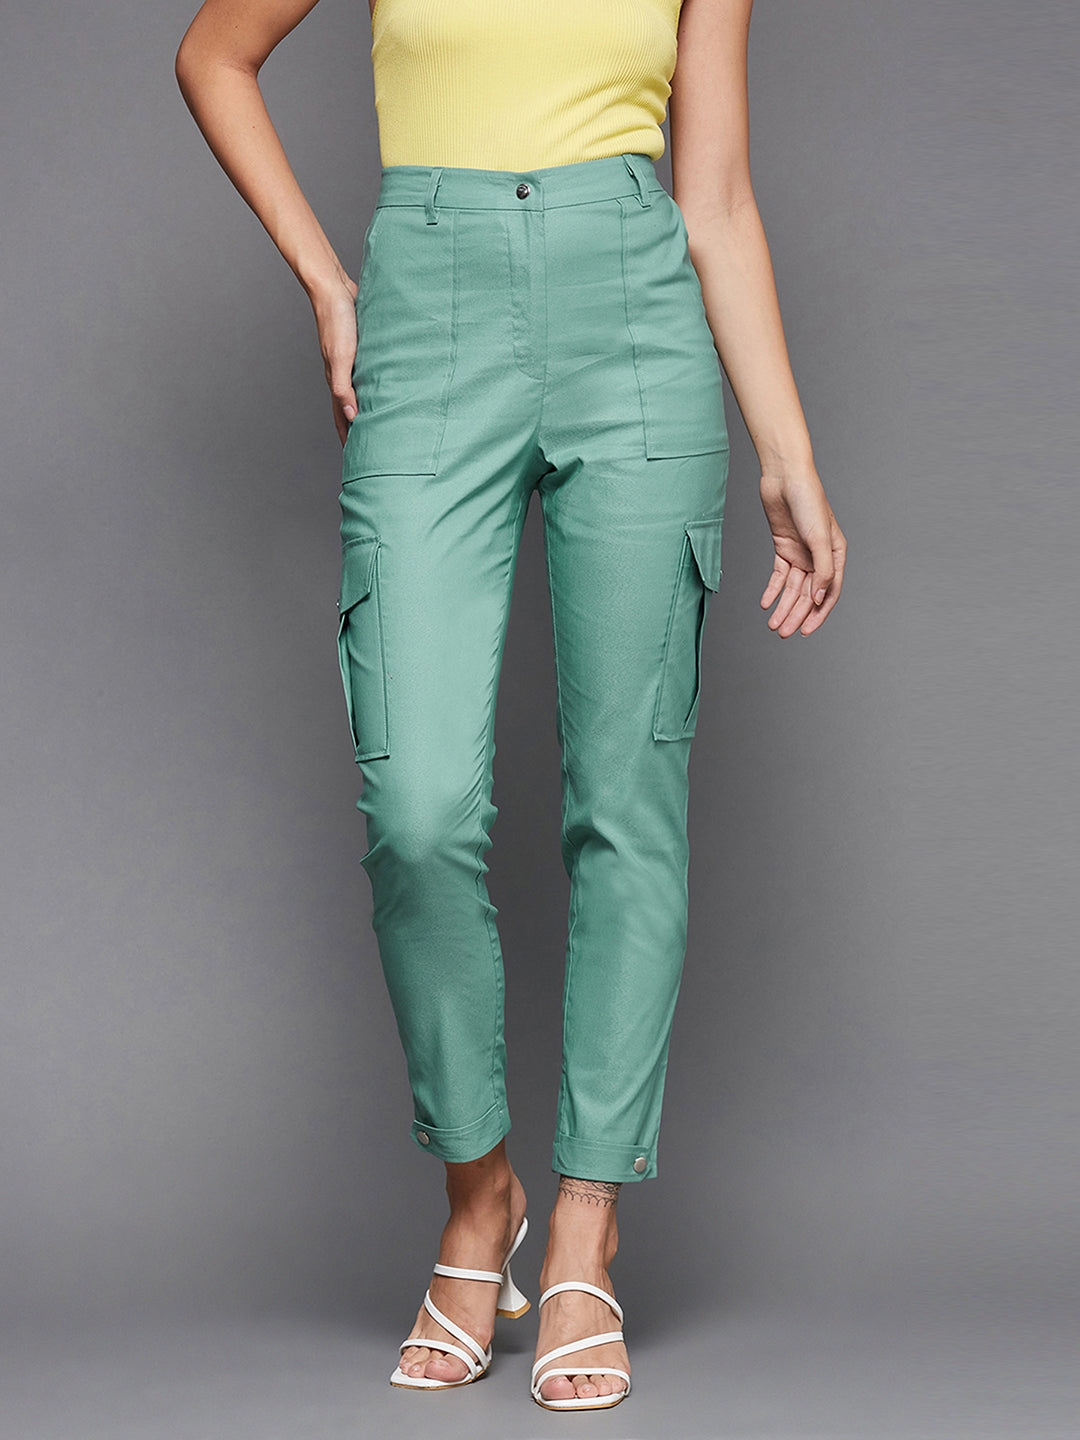 MISS CHASE | Turquoise Solid Polyester High Waist Regular Length Trouser